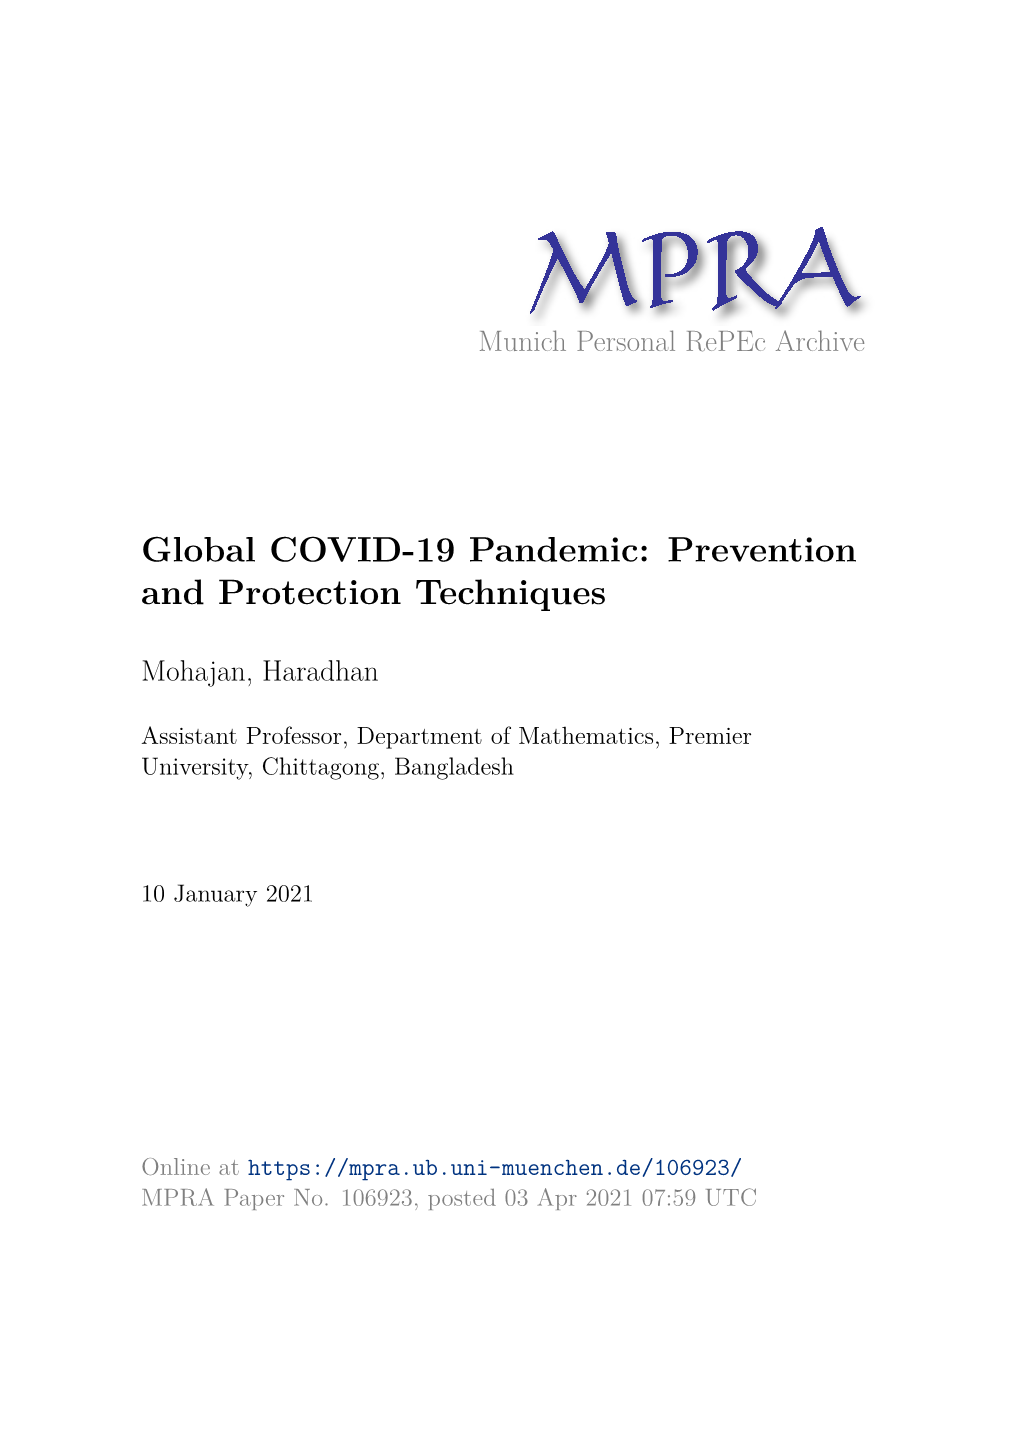 Global COVID-19 Pandemic: Prevention and Protection Techniques